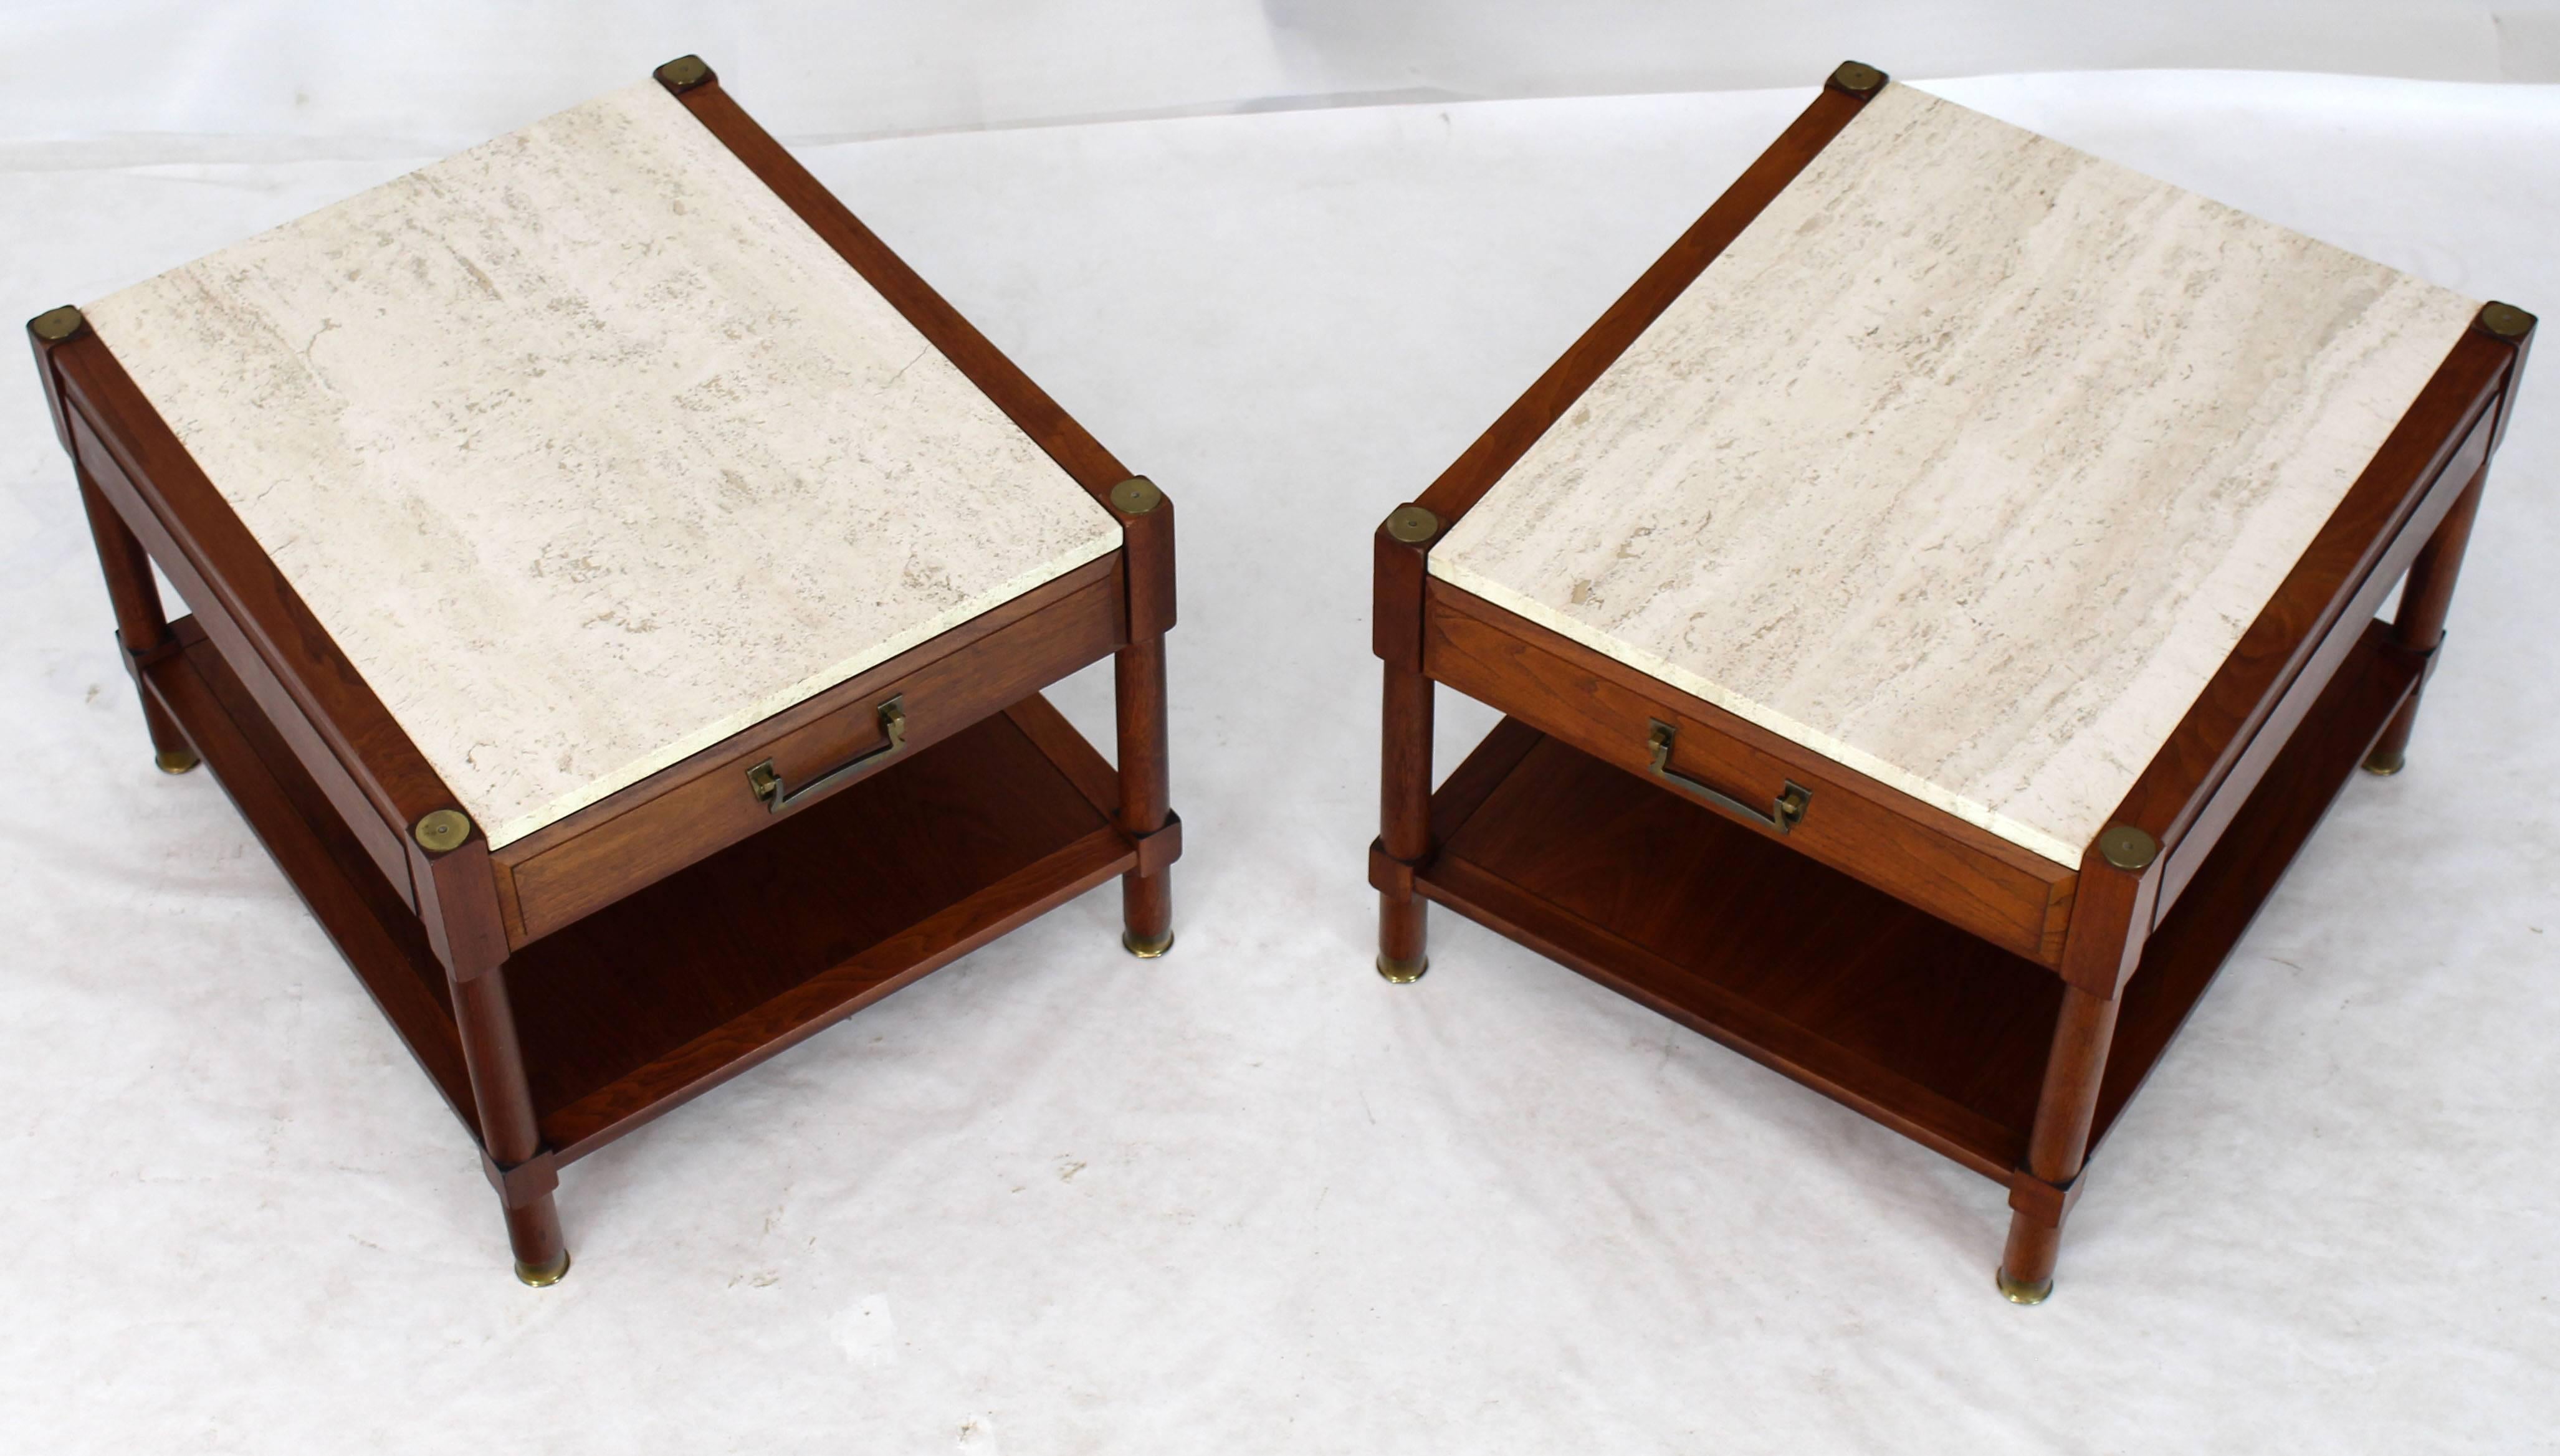 Pair of Mid-Century Modern travertine tops walnut side tables with brass feet and caps.